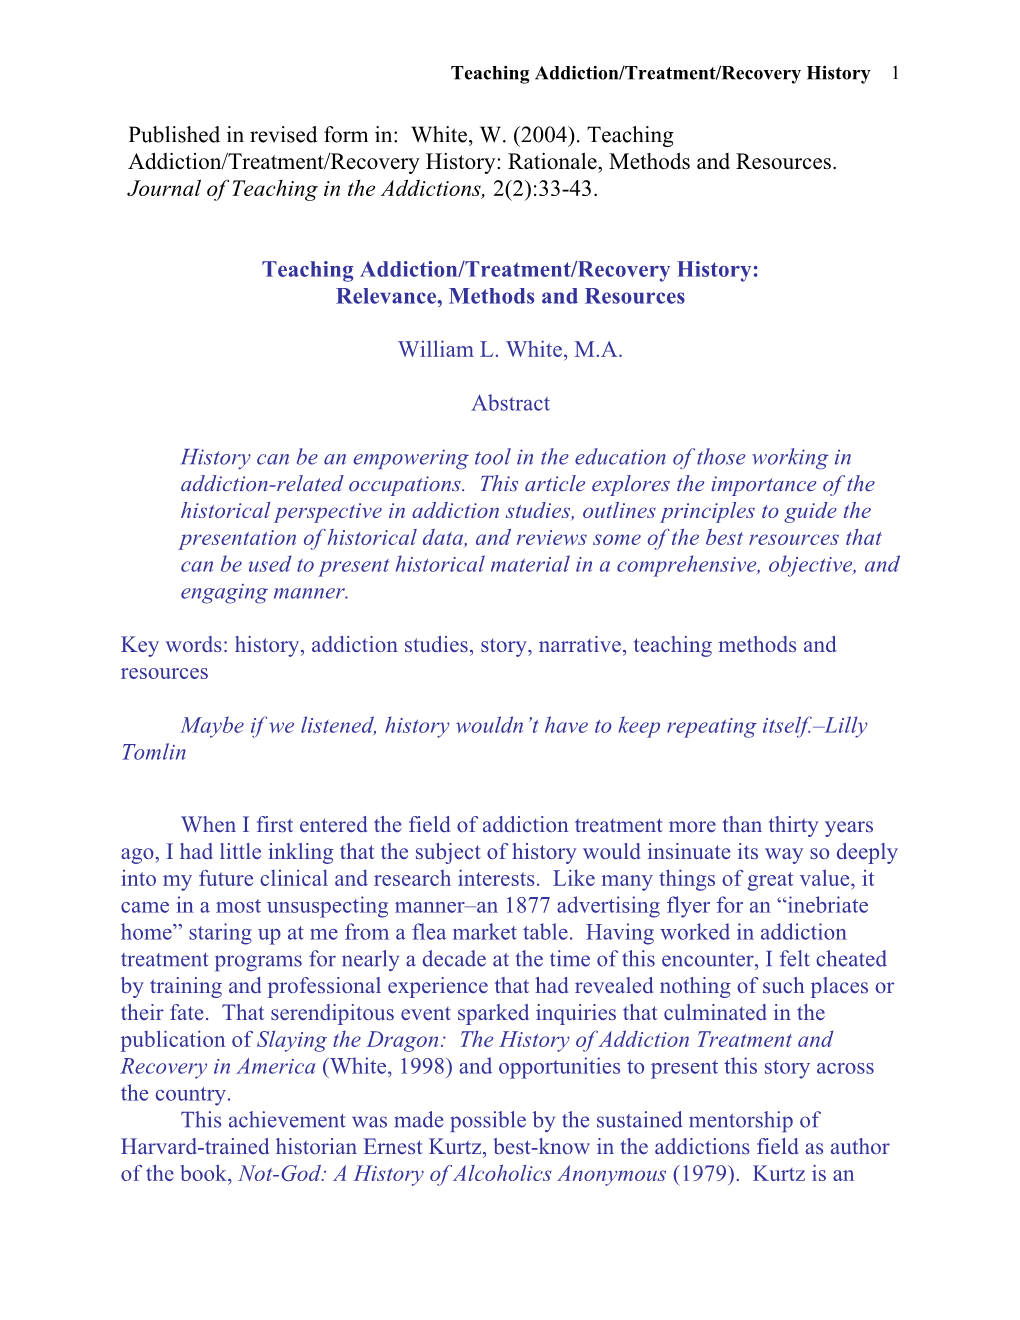 White, W. (2004). Teaching Addiction/Treatment/Recovery History: Rationale, Methods and Resources